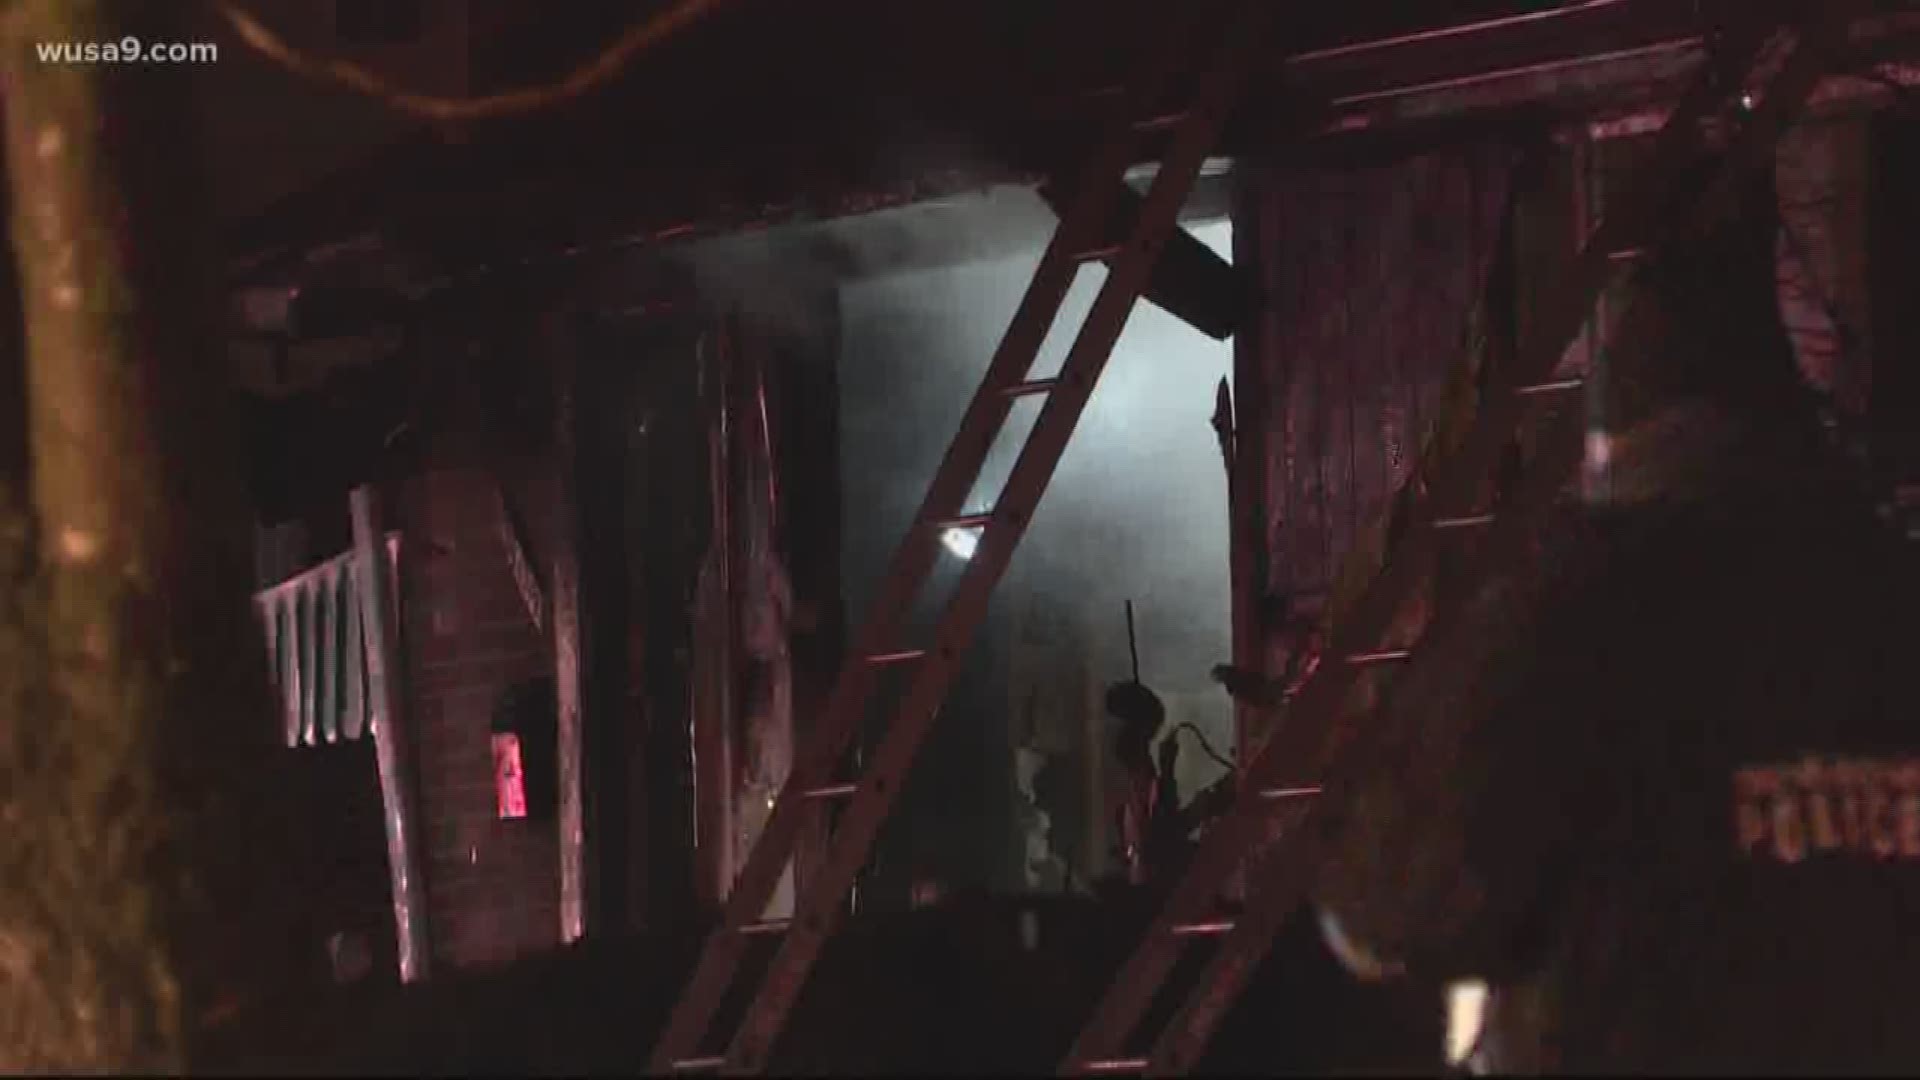 The fire broke out around 6:15 p.m. and left significant damage to the basement and first floor of the residence, fire officials said.